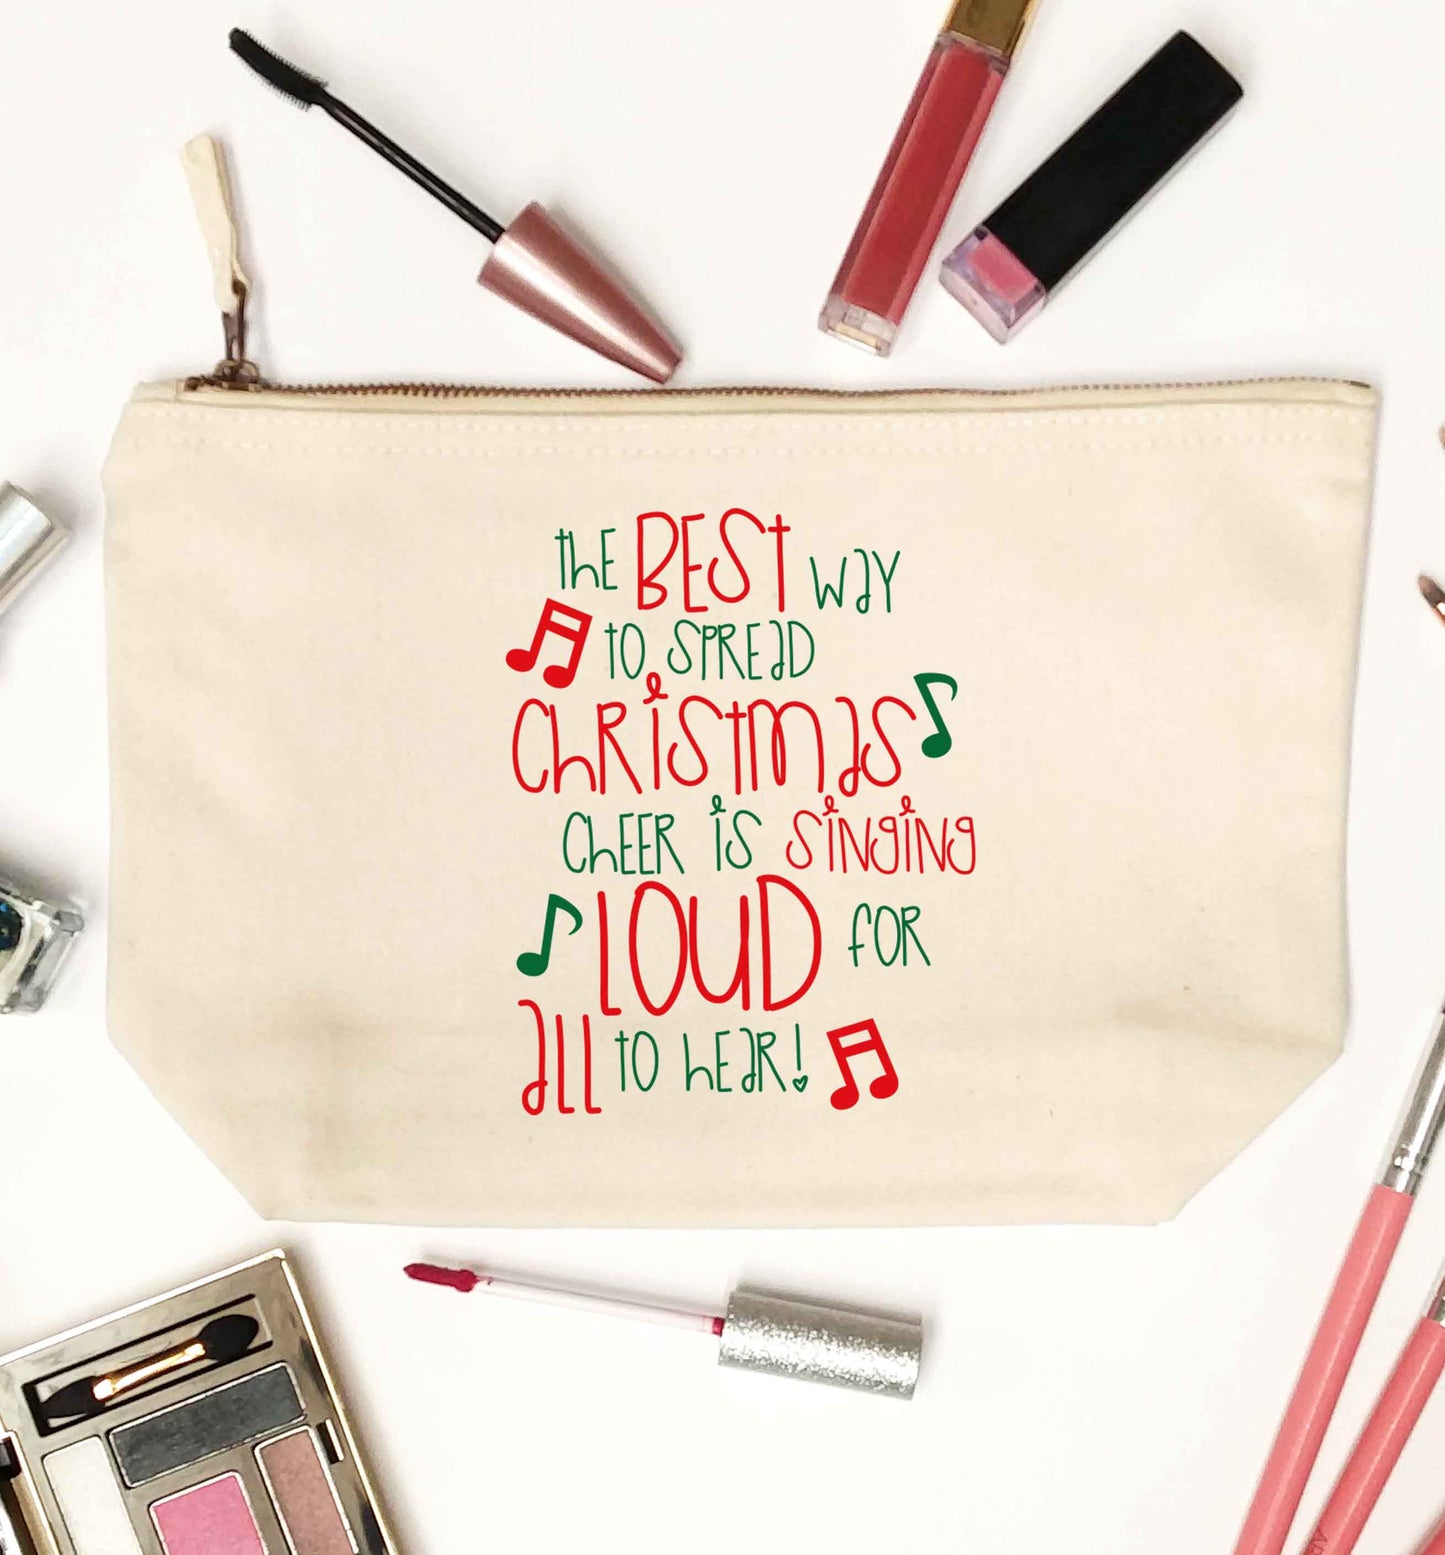 The best way to spread Christmas cheer is singing loud for all to hear natural makeup bag